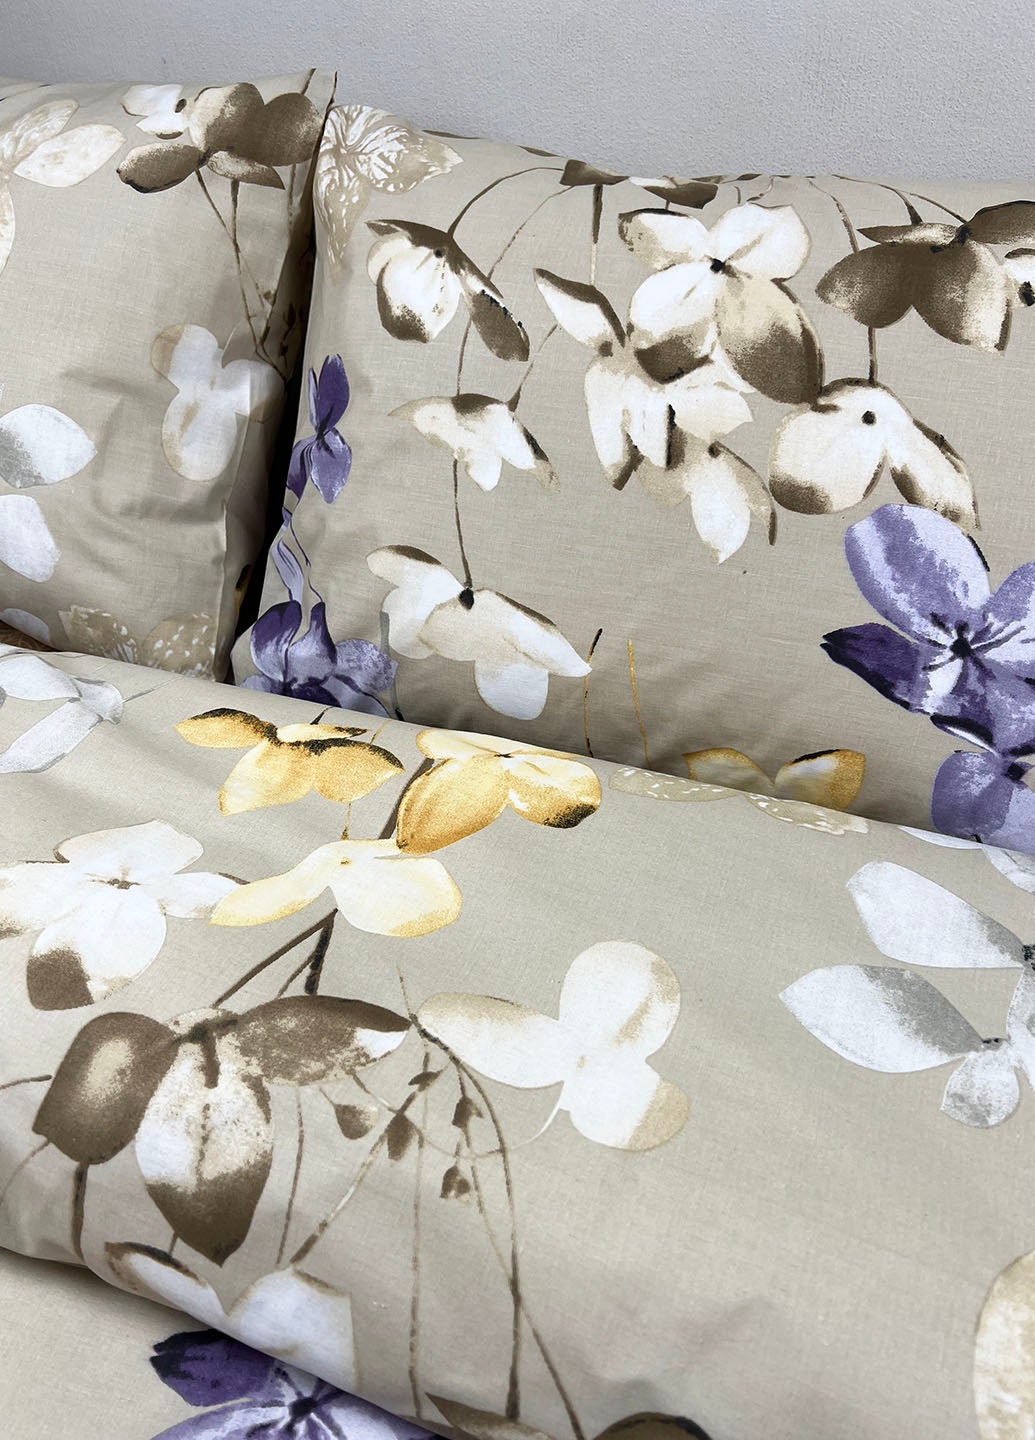 Bedding Set With Floral Print | Bed Linens Set With Lilac Pattern | Festive Home Decor, Housewarming Present.